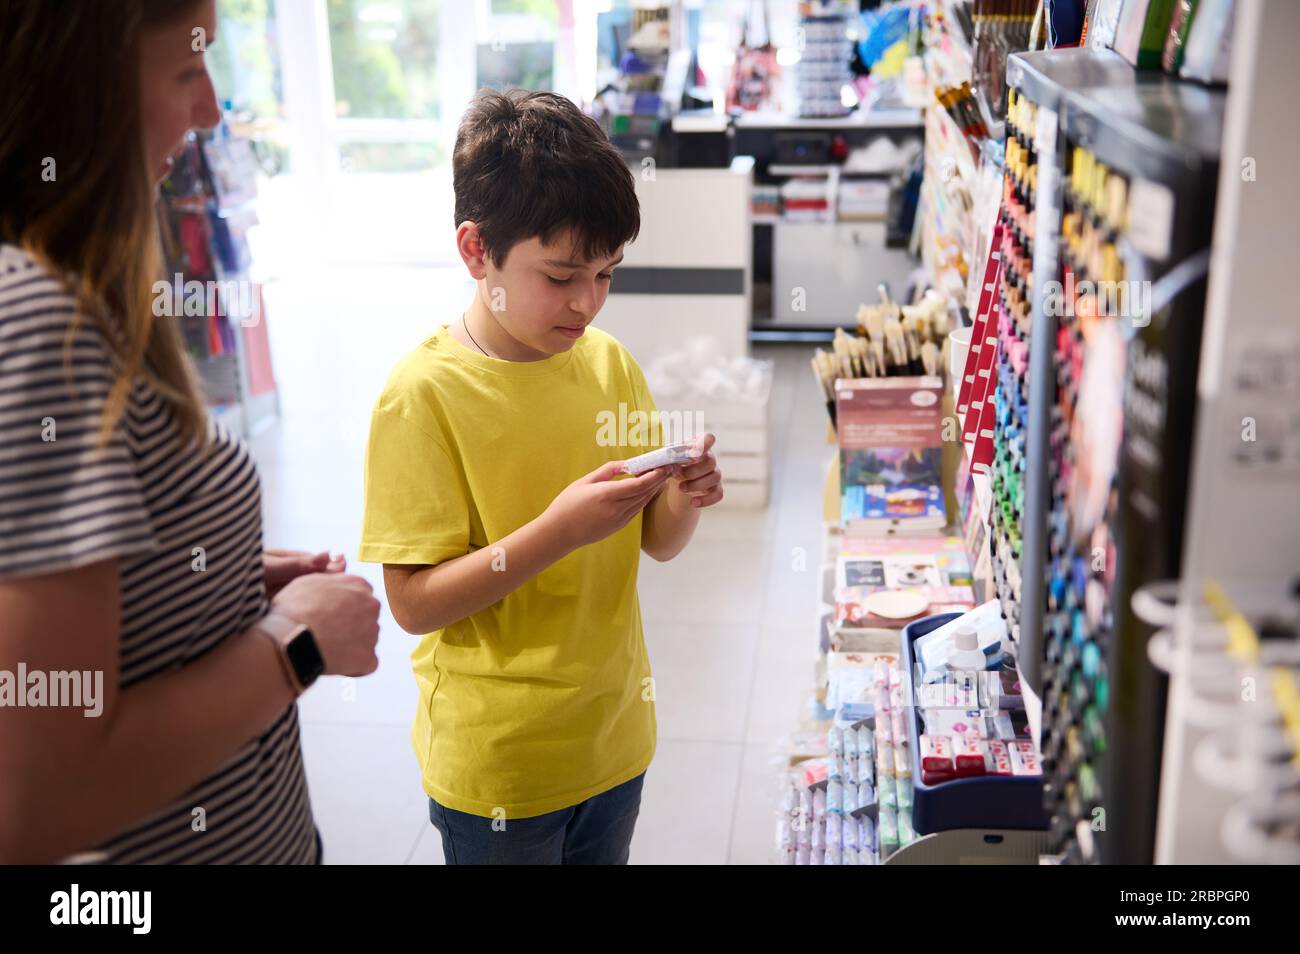 Multi-ethnic adorable teen boy 11-14 years old, choosing modeling clay in a school stationery store. People. Creative hobby. Education. Fine art. Prep Stock Photo